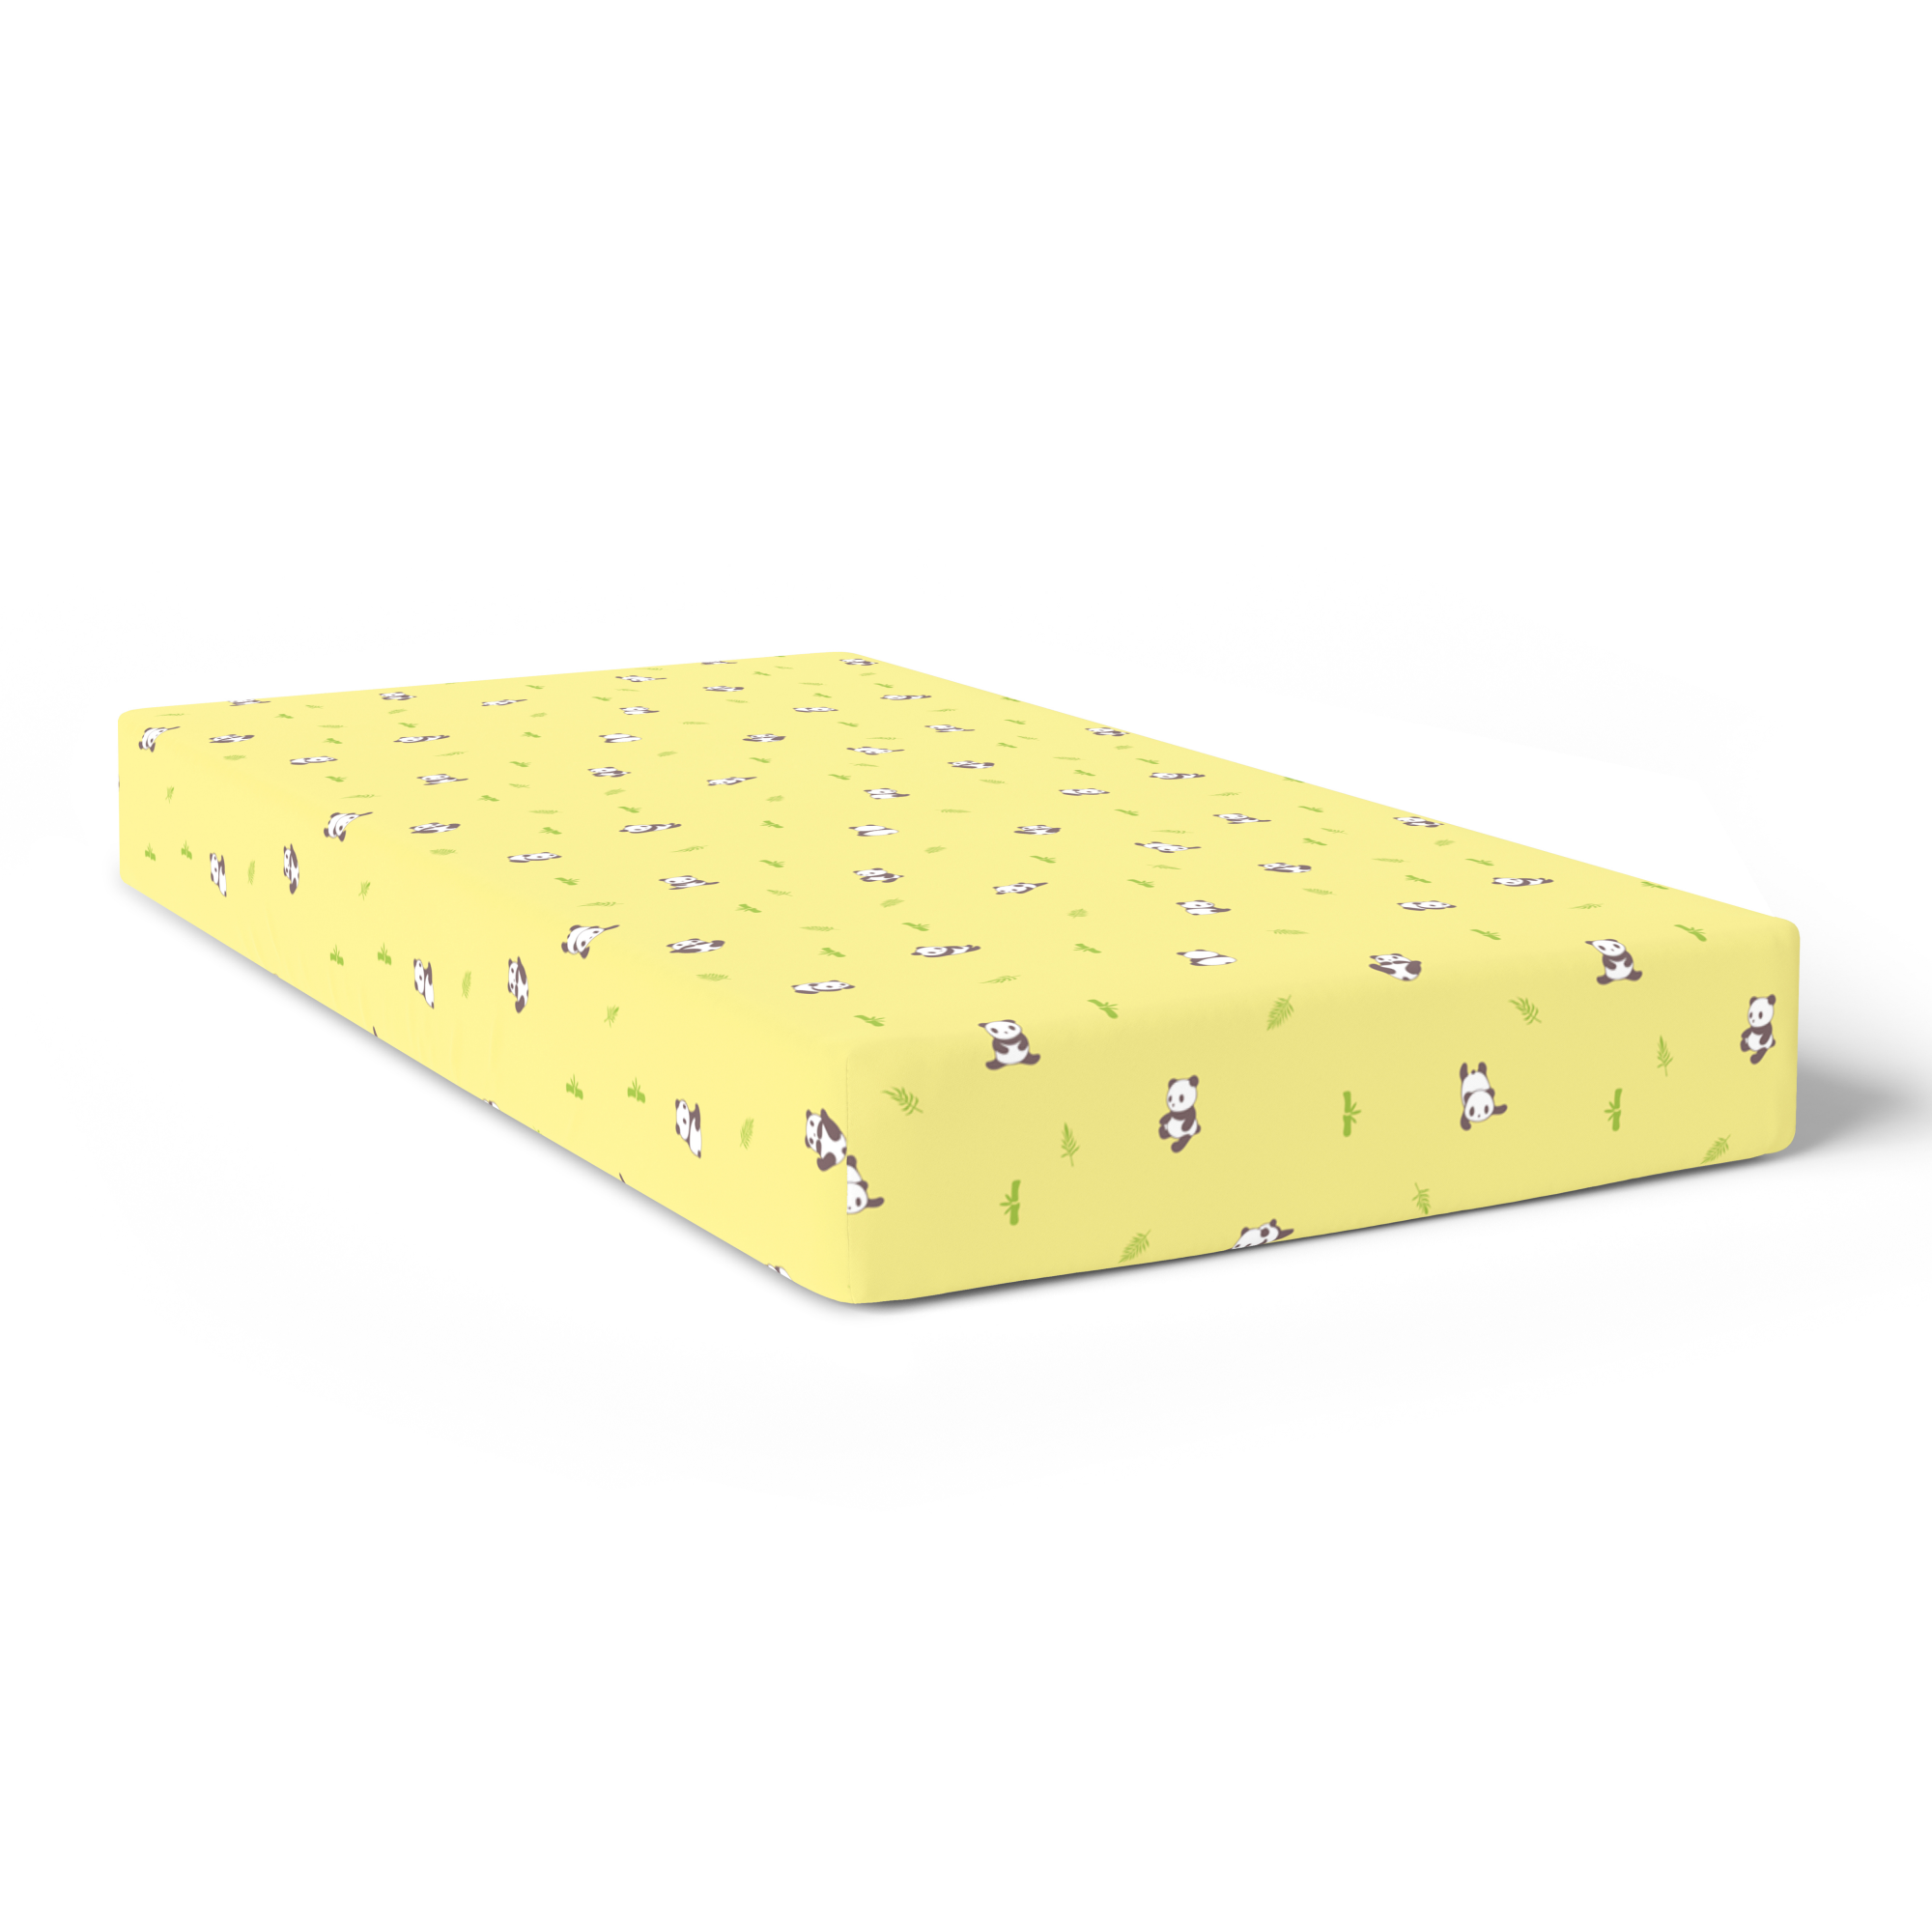 The White Cradle Pure Organic Cotton Fitted Cot Sheet for Baby Crib - Super Soft, Smooth, Absorbent, Twill Fabric for Infants, Newborns, Babies, Toddlers - Yellow Panda